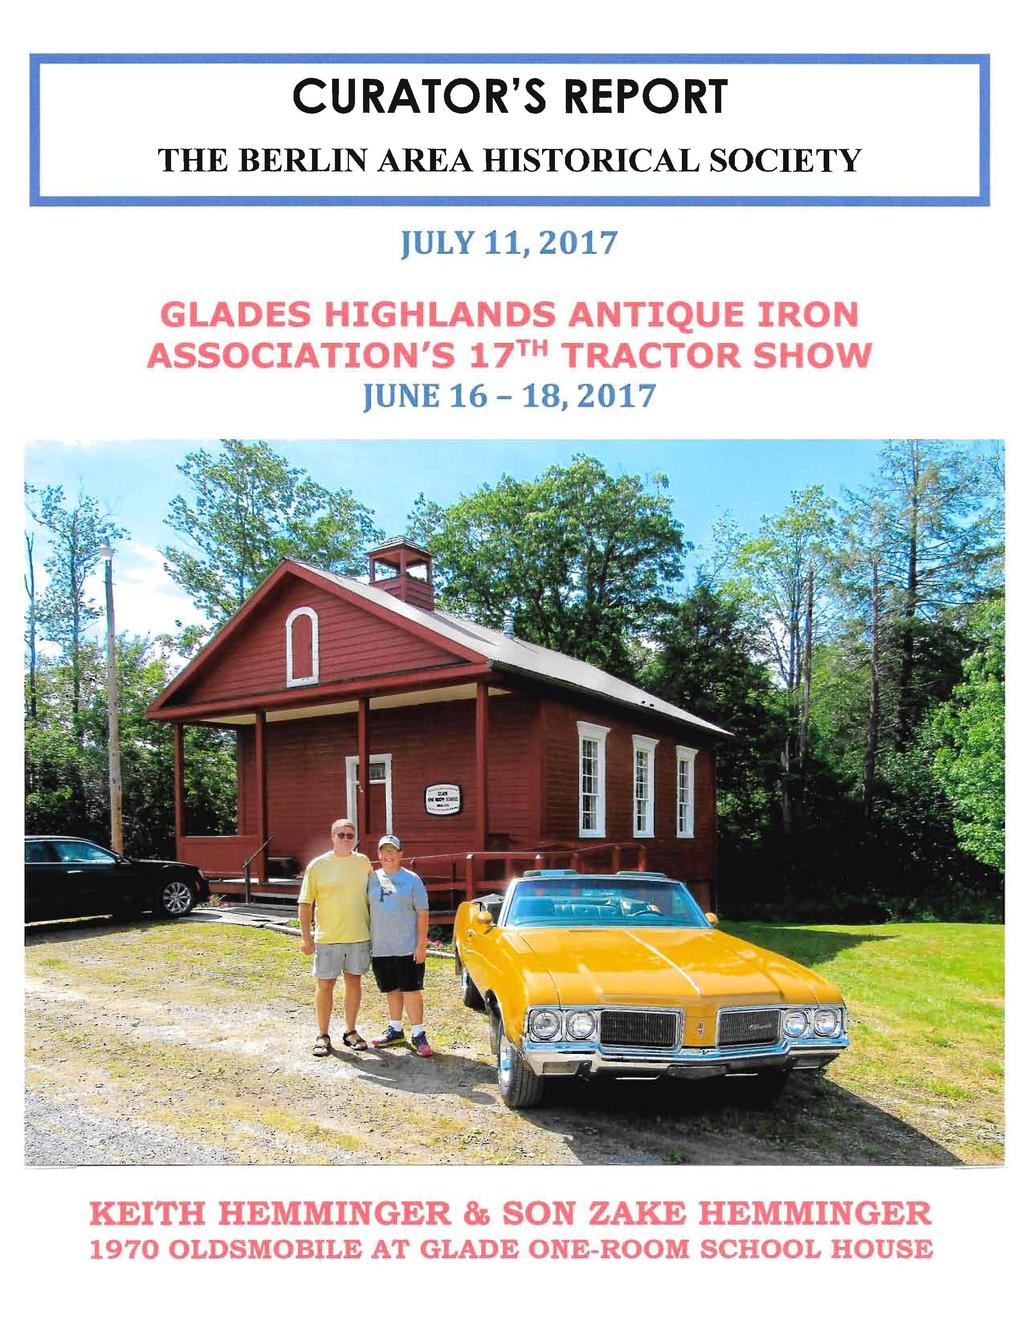 CURATOR'S REPORT THE BERLIN AREA HISTORICAL SOCIETY JULY 11, 2017 GLADES H GHLANDS AN IQUE I 0 ASSOCIATION'S 7